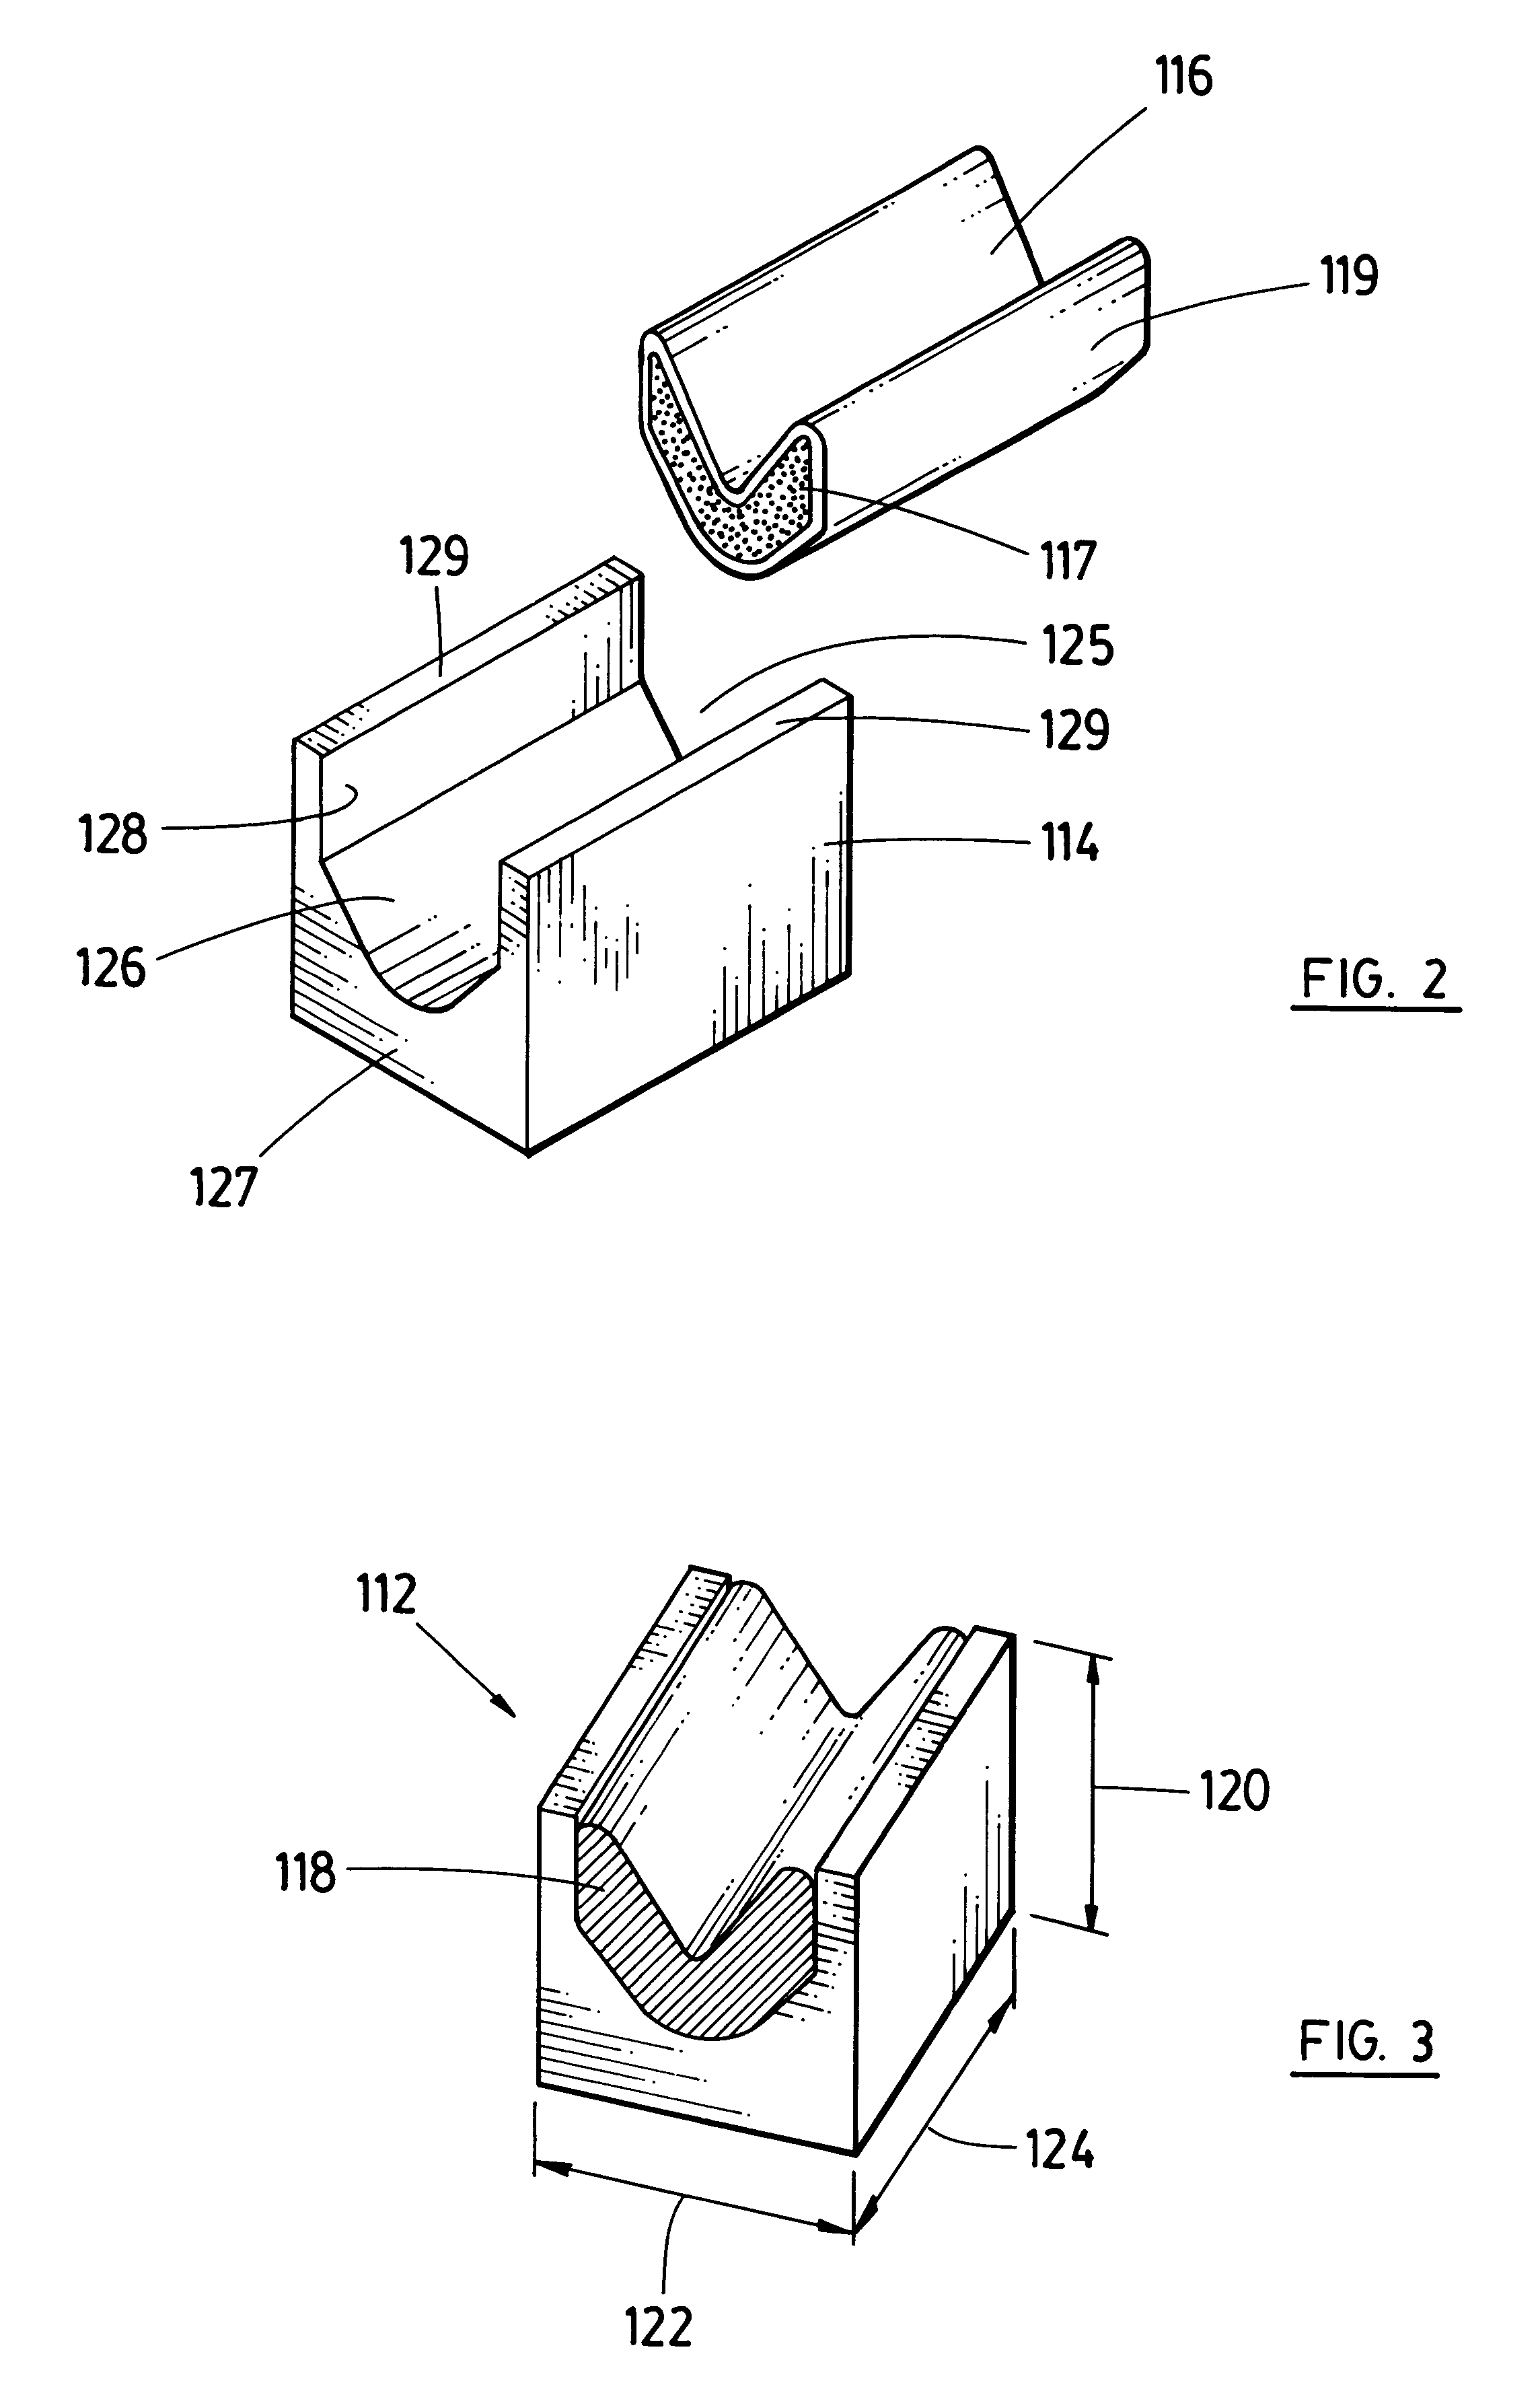 Shape charge assembly system